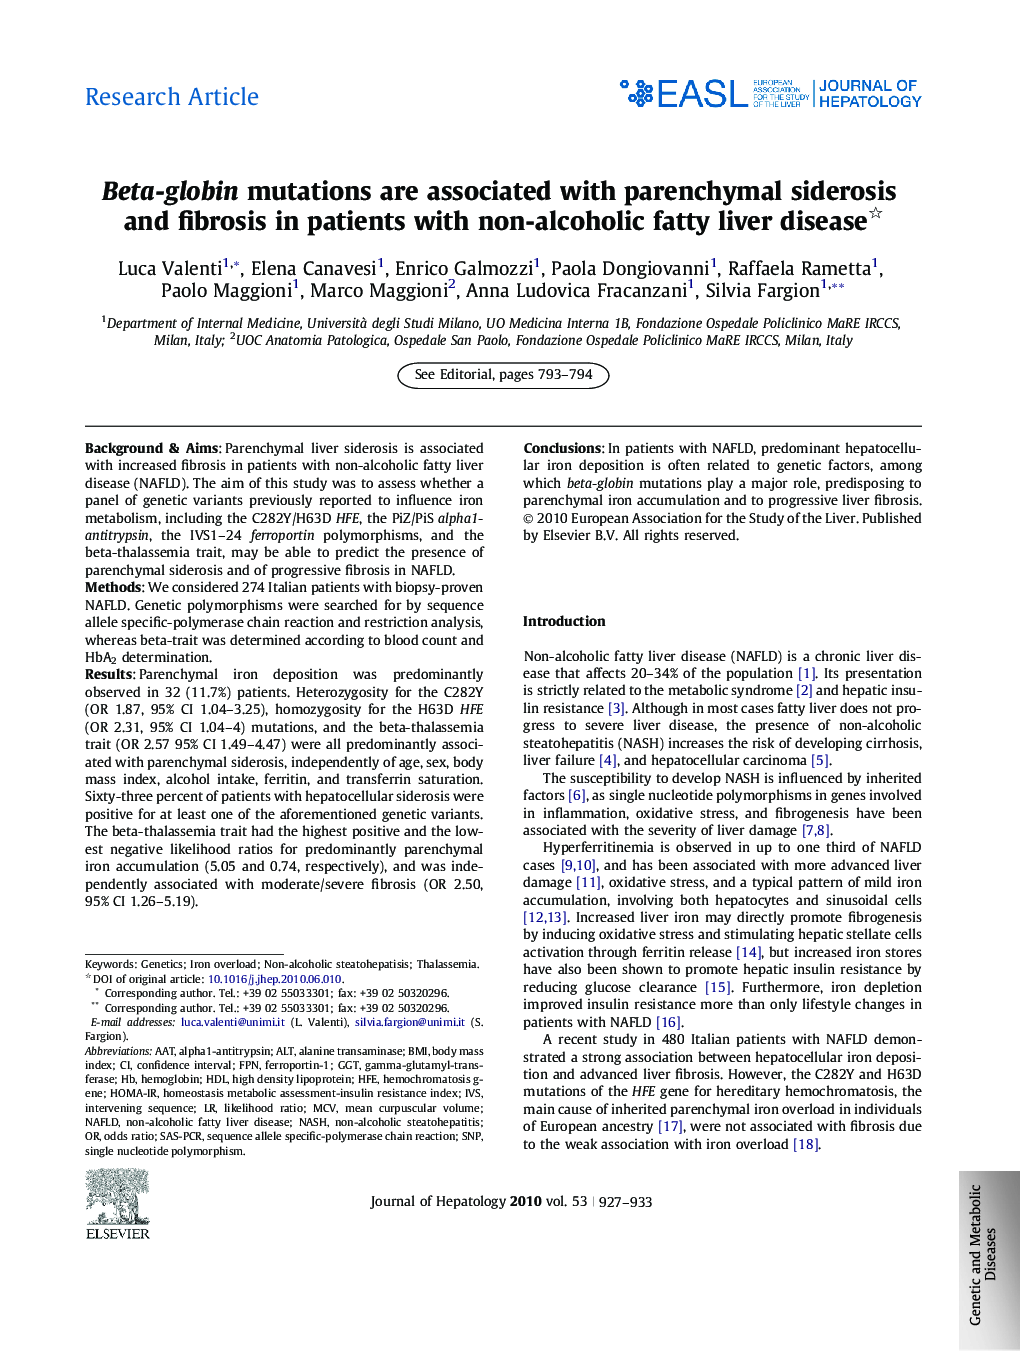 Research ArticleBeta-globin mutations are associated with parenchymal siderosis and fibrosis in patients with non-alcoholic fatty liver disease